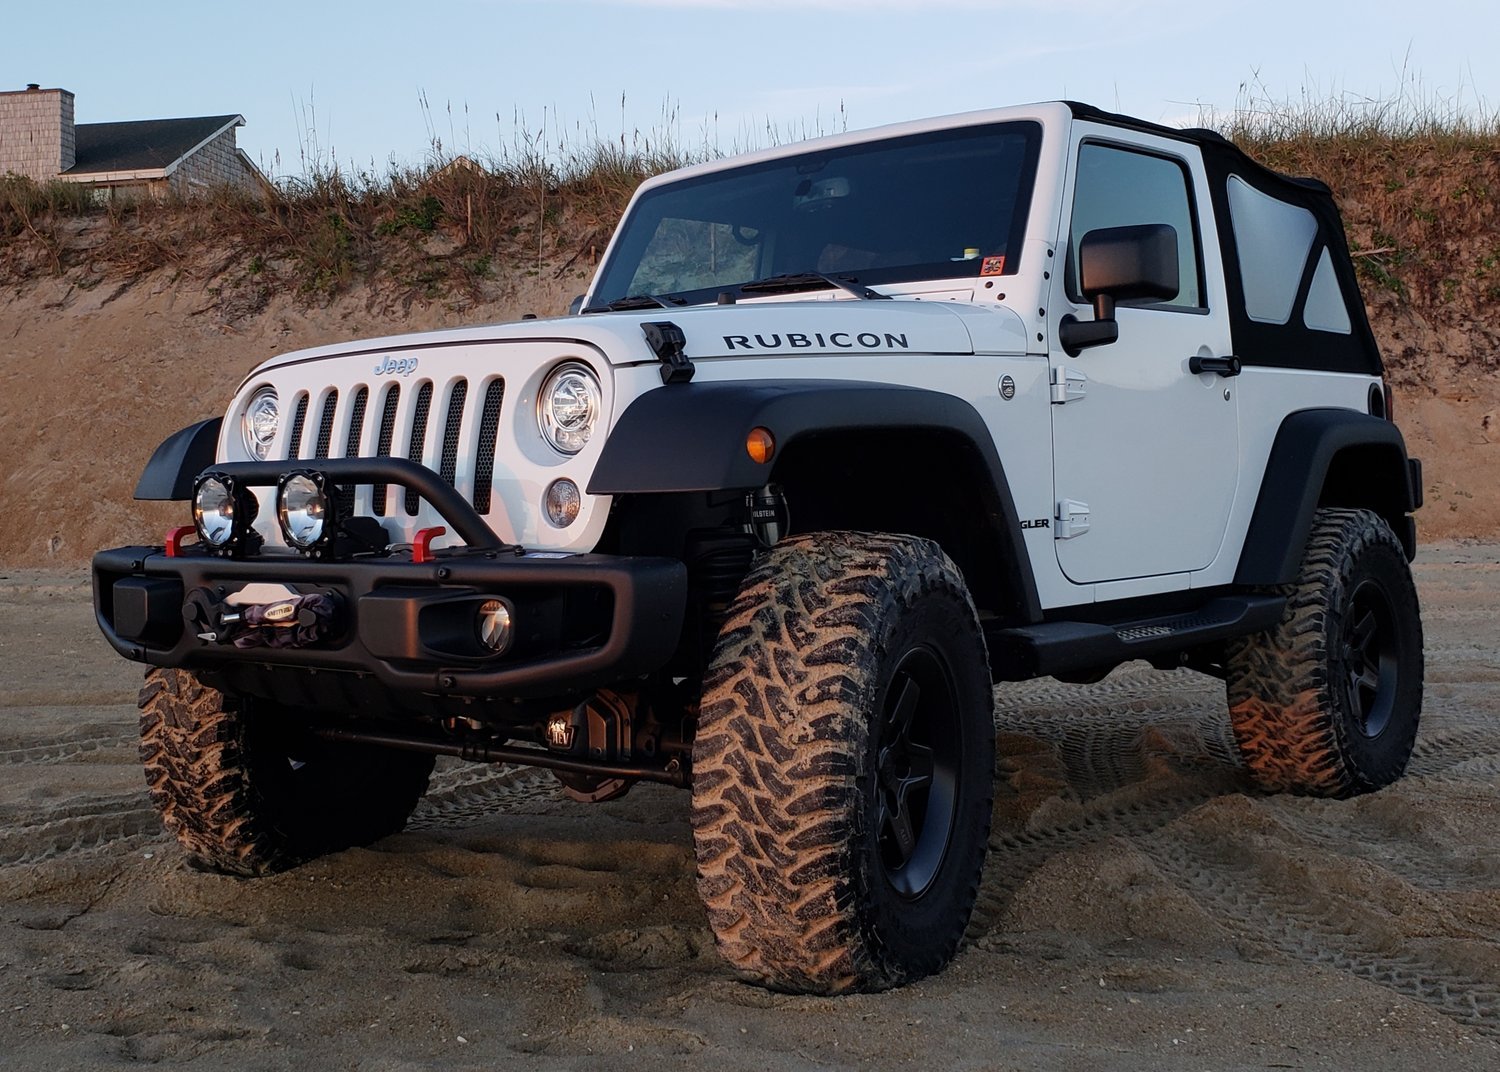 All Rise for the Judge (and La Máquina) – The Wrangler